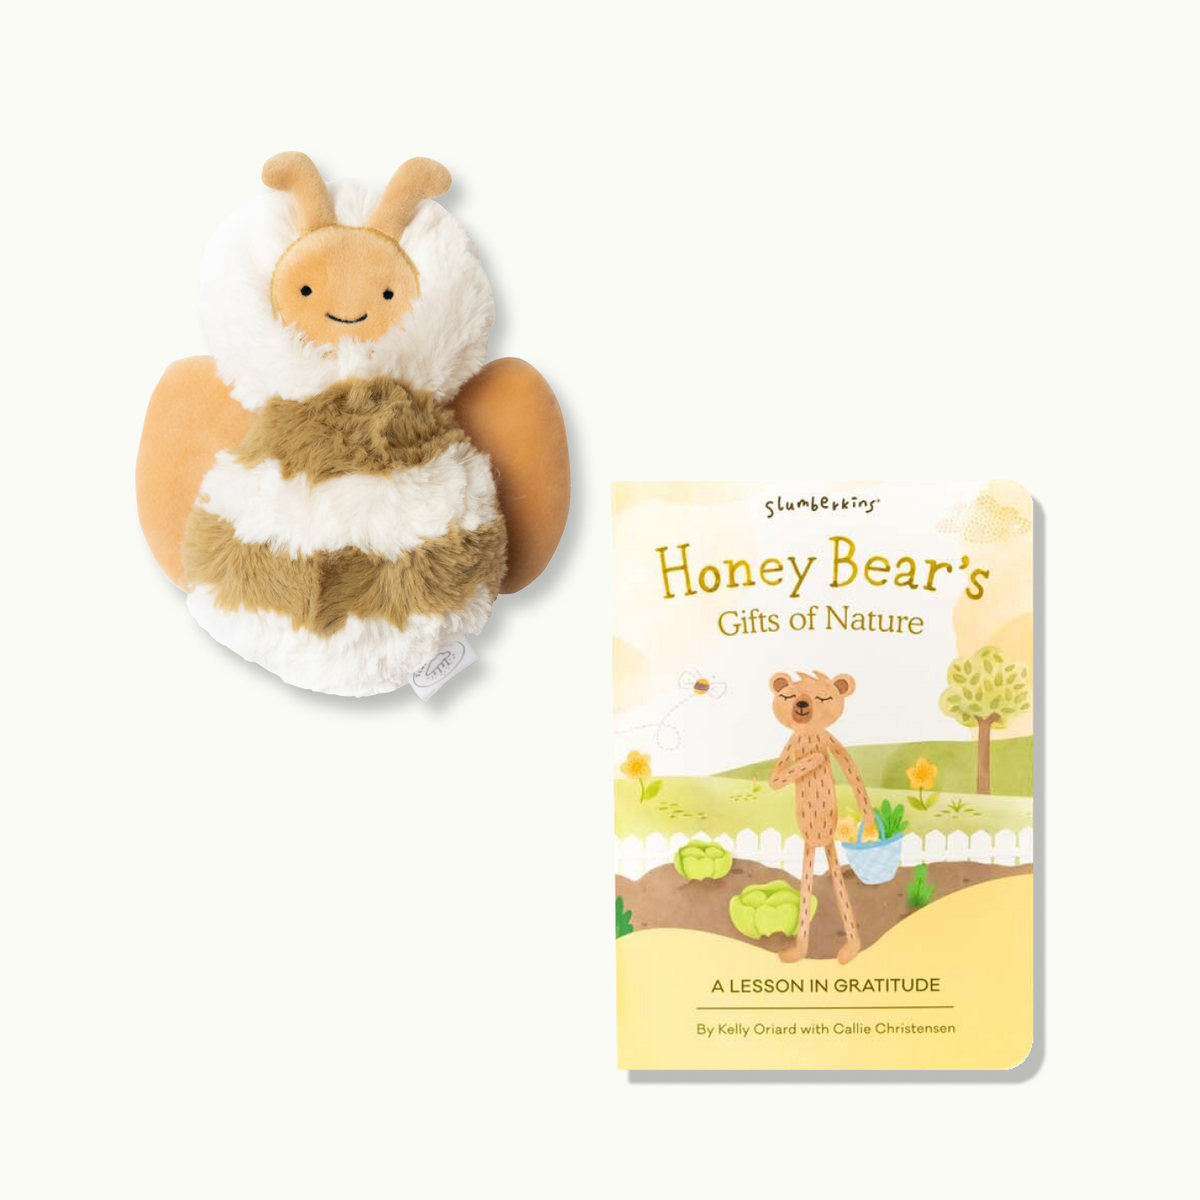 honey bee mini and slumberkins honey bear's gifts of nature - a lesson in gratitude by Kelly Oriard and Callie Christensen #style_honey bee